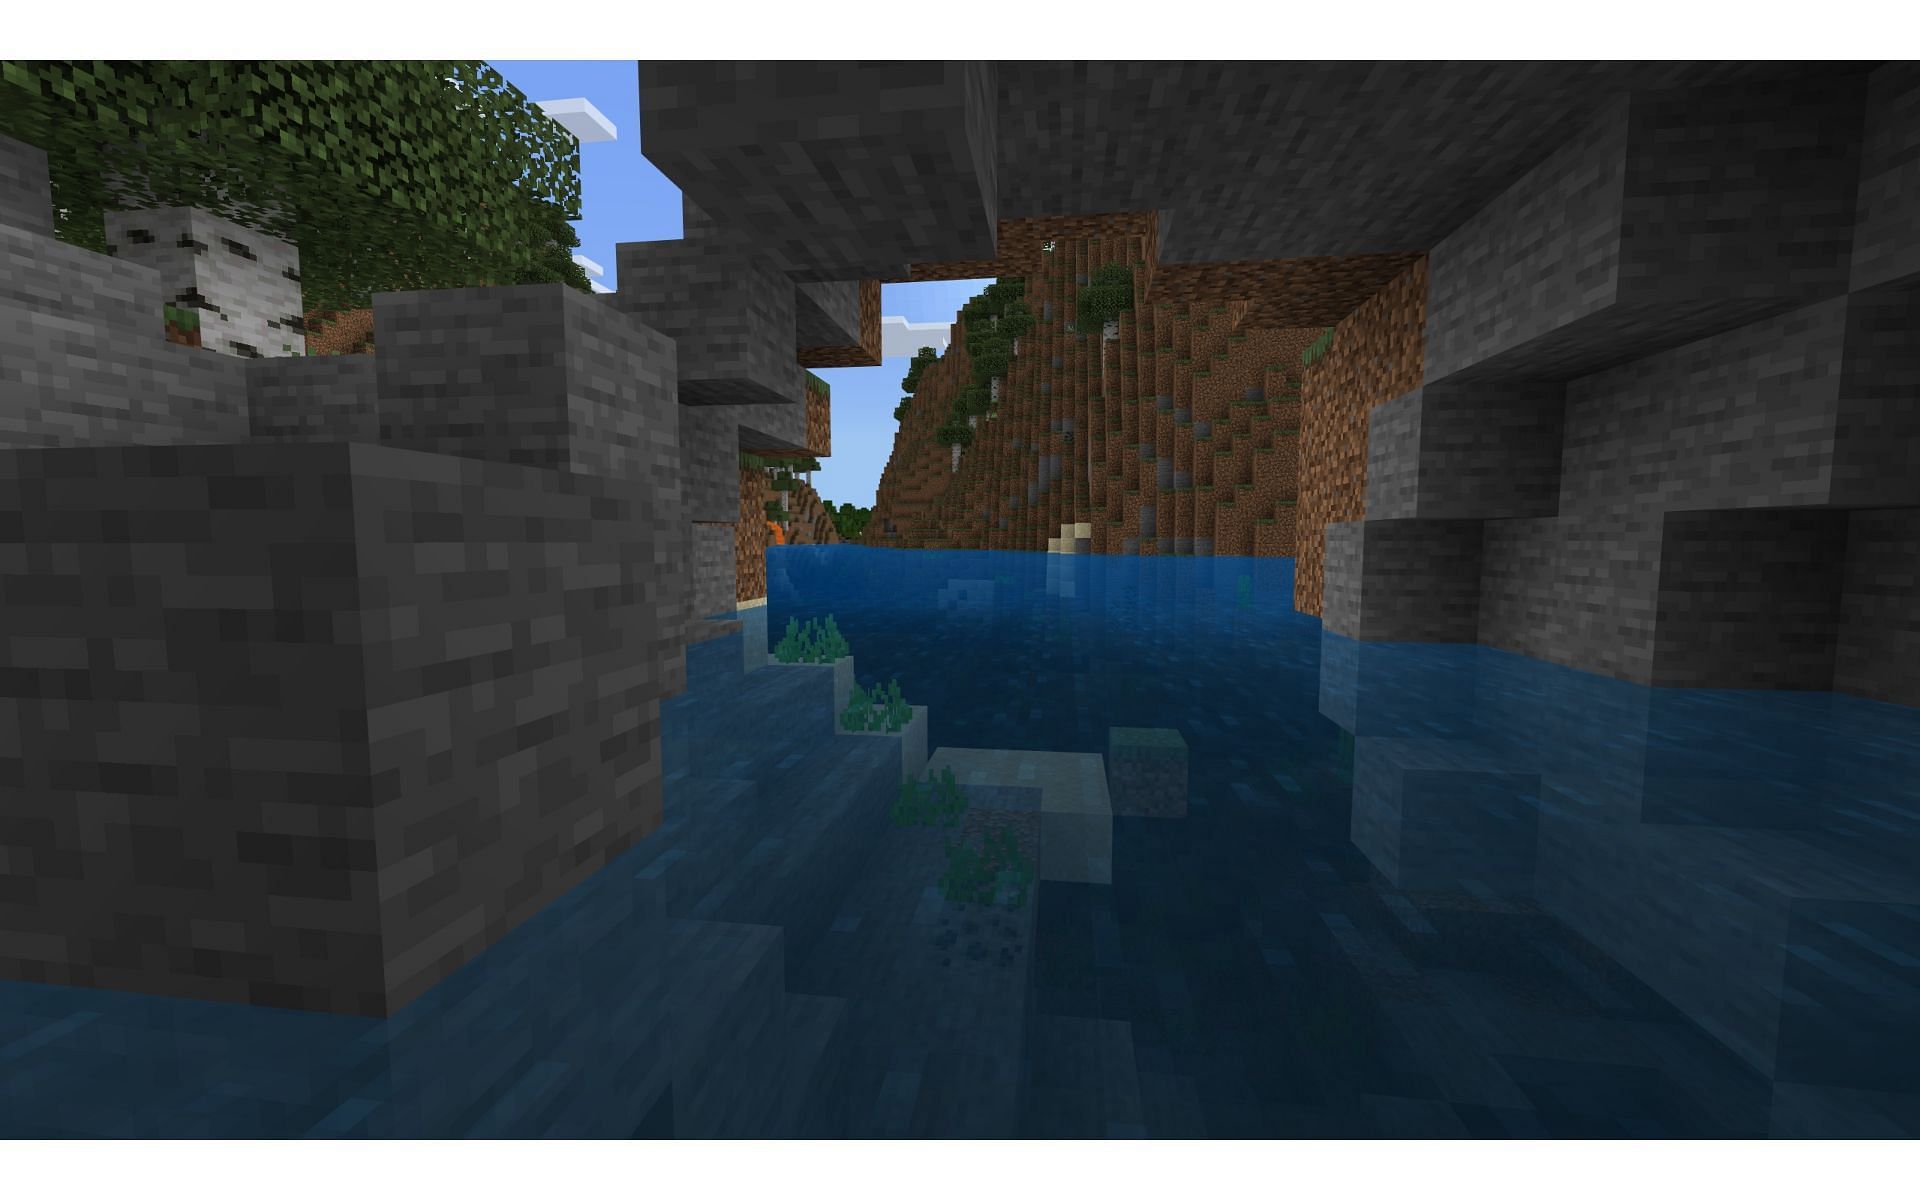 Players can gear up for a pirate-themed adventure with this seed (Image via Mojang)